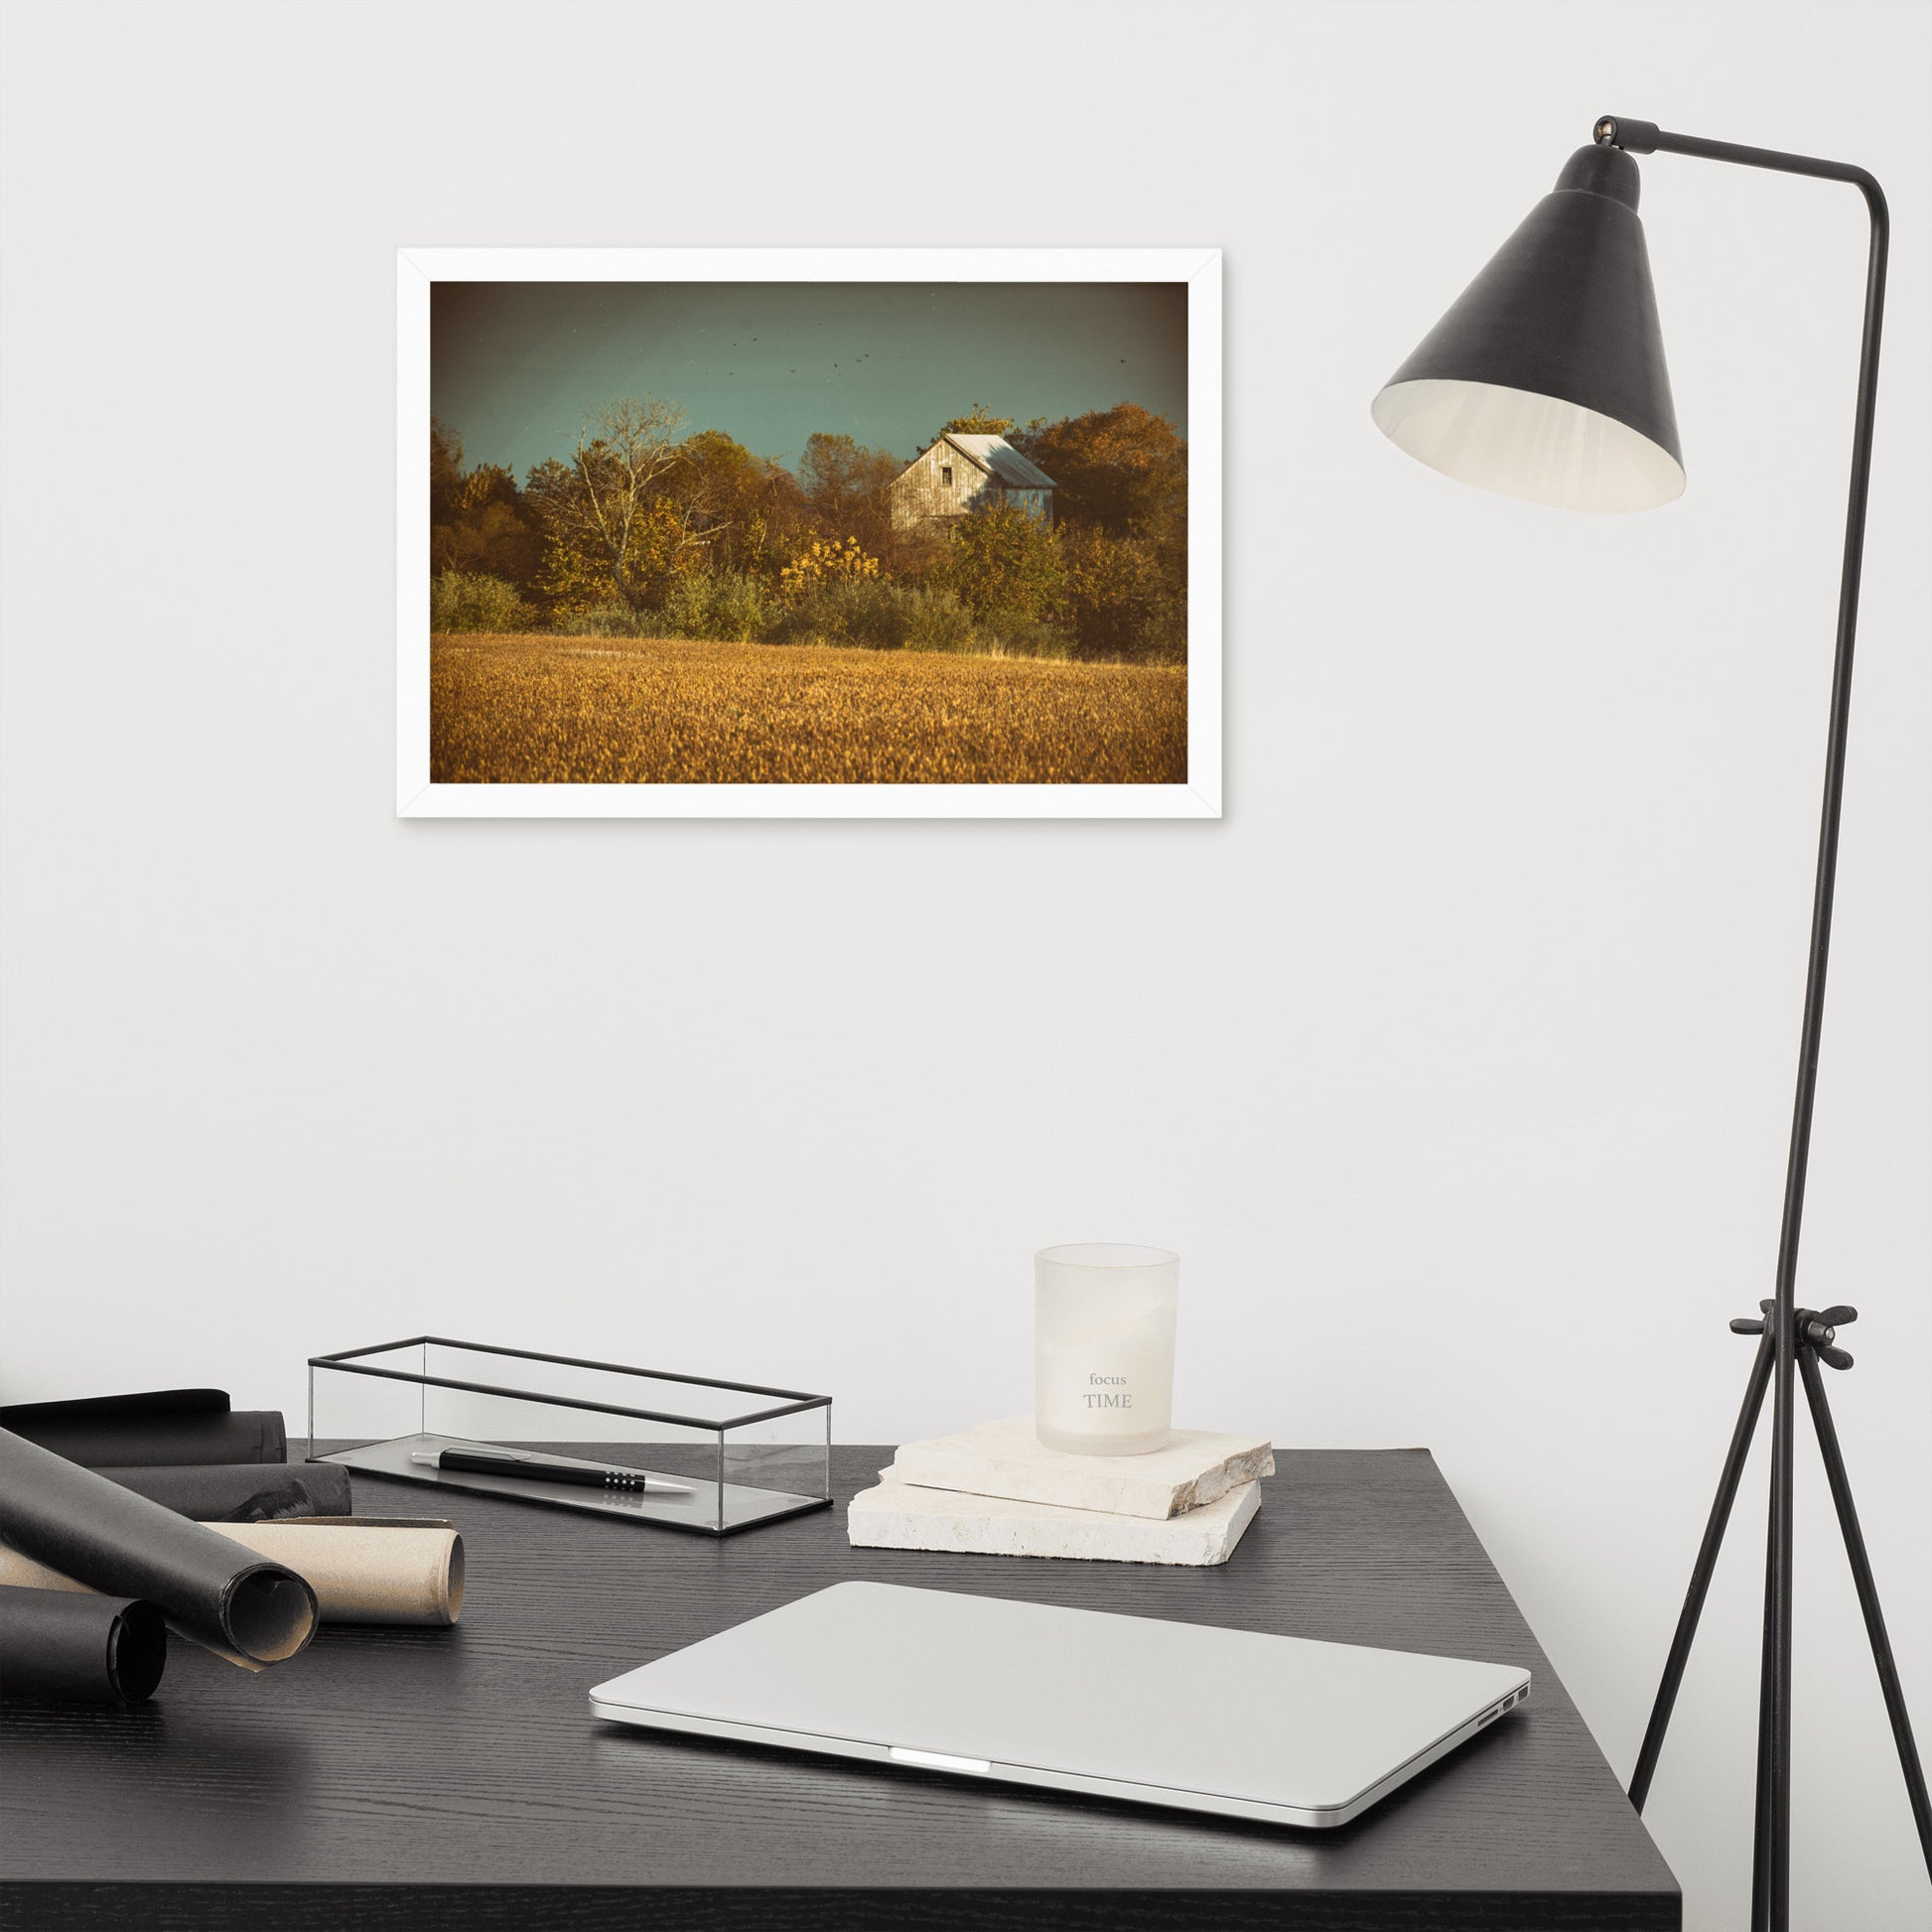 Wall Art Rustic Farmhouse: Abandoned Barn In The Trees Abstract Colorized Rustic / Rural Landscape Photo Paper Prints - Artwork - Wall Decor